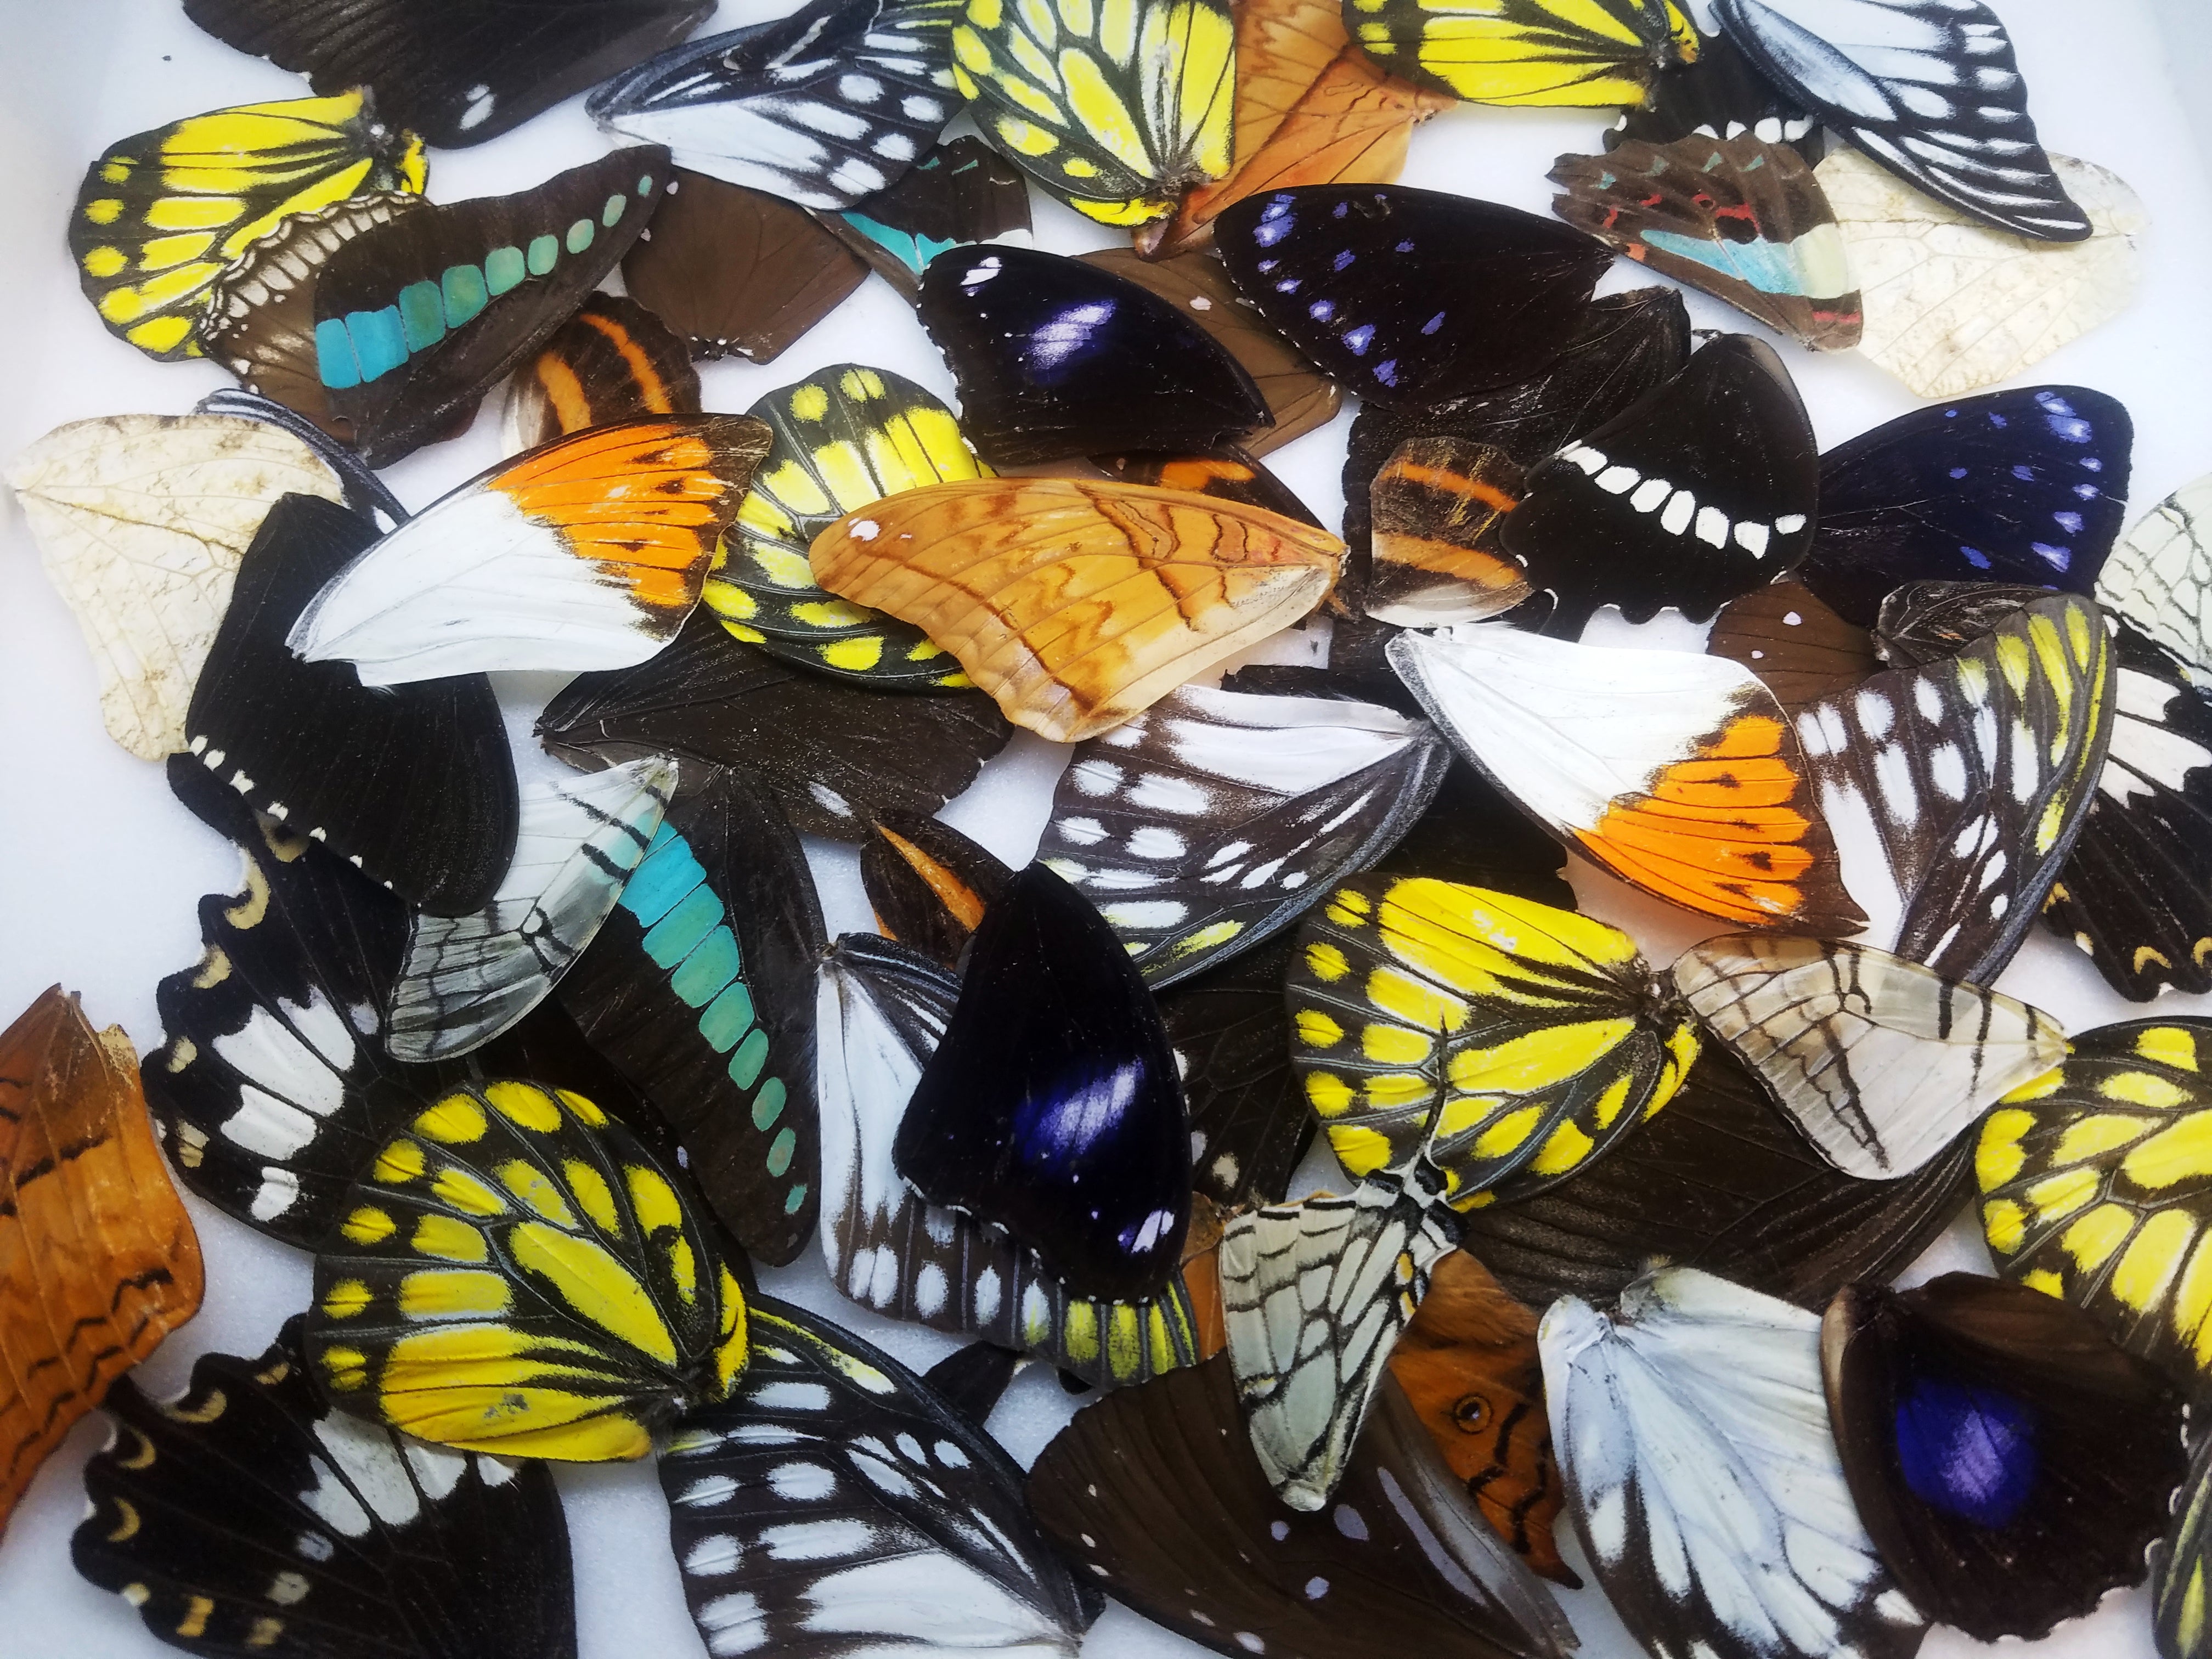 Mixed lot of tropical butterfly wings for art, crafts, jewelry - Little Caterpillar Art Little Caterpillar Art Butterfly Specimens 